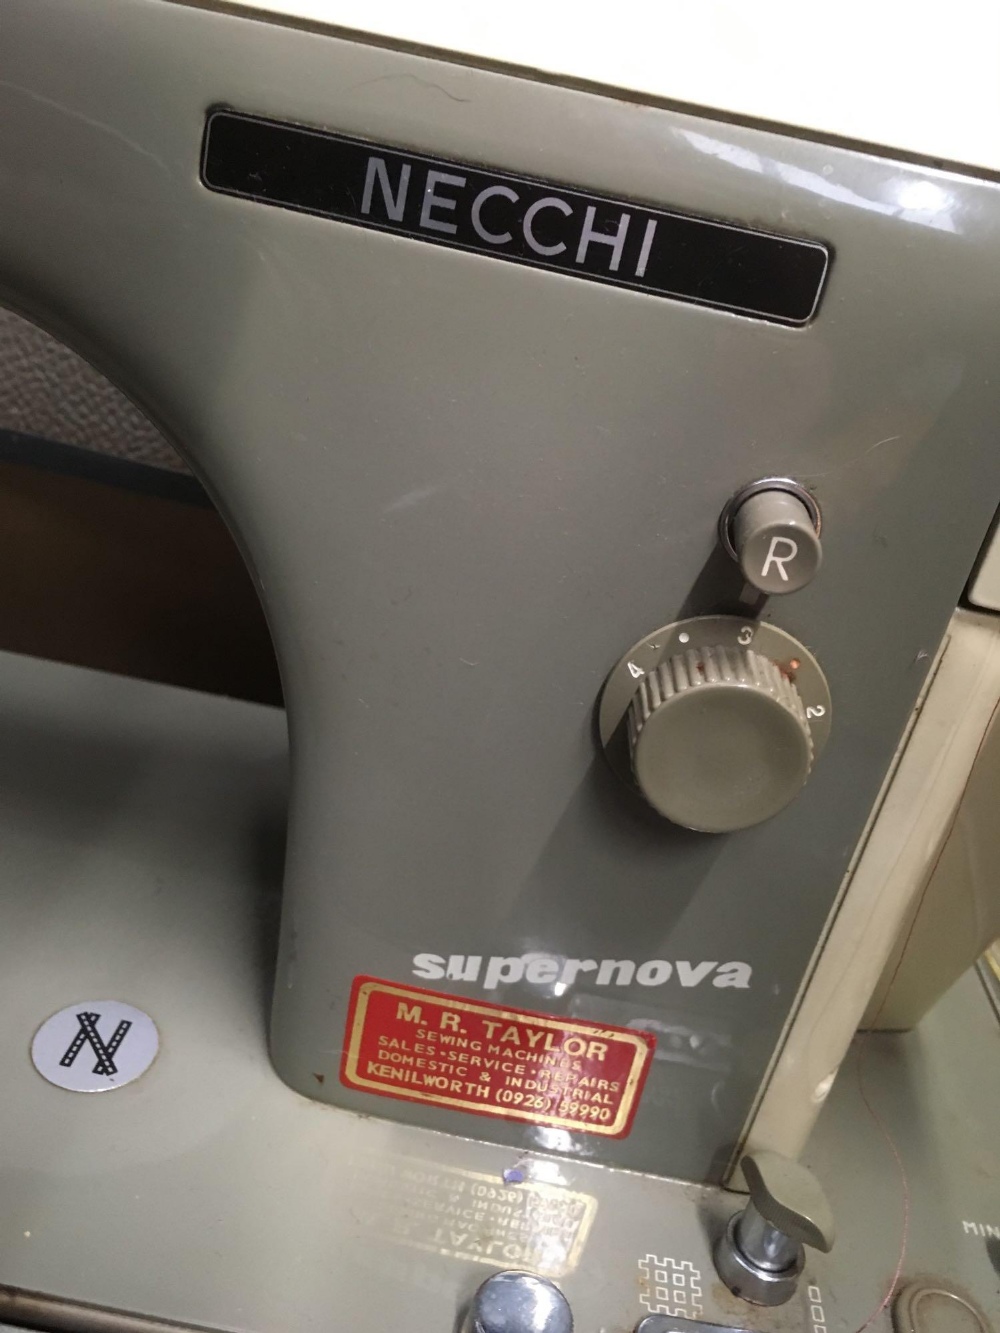 NECCHI ELECTRIC SEWING MACHINE, - Image 2 of 3